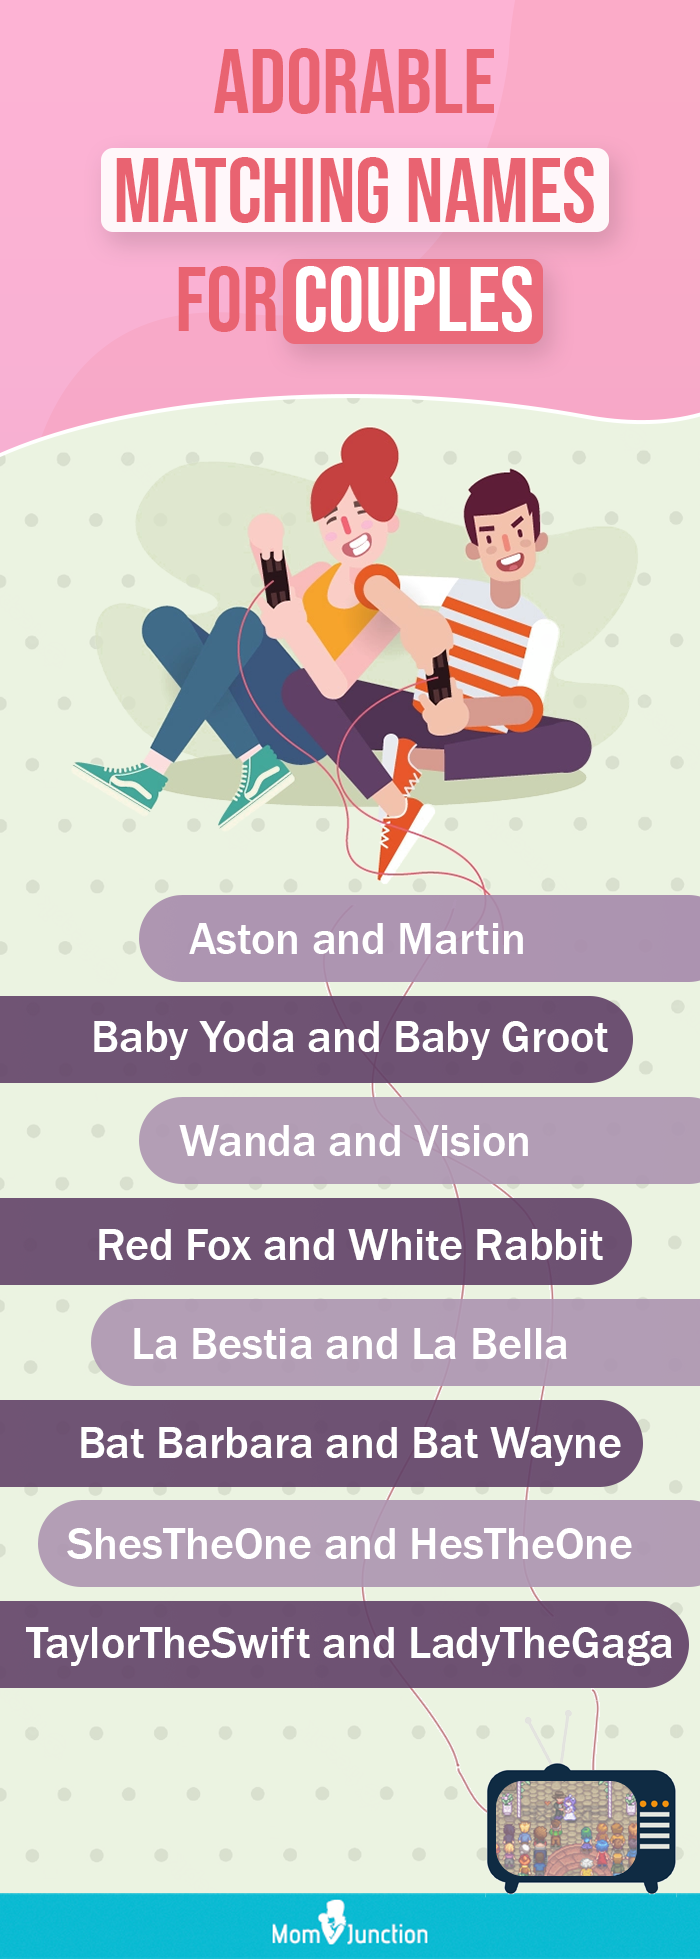 adorable matching names for couples [infographic]